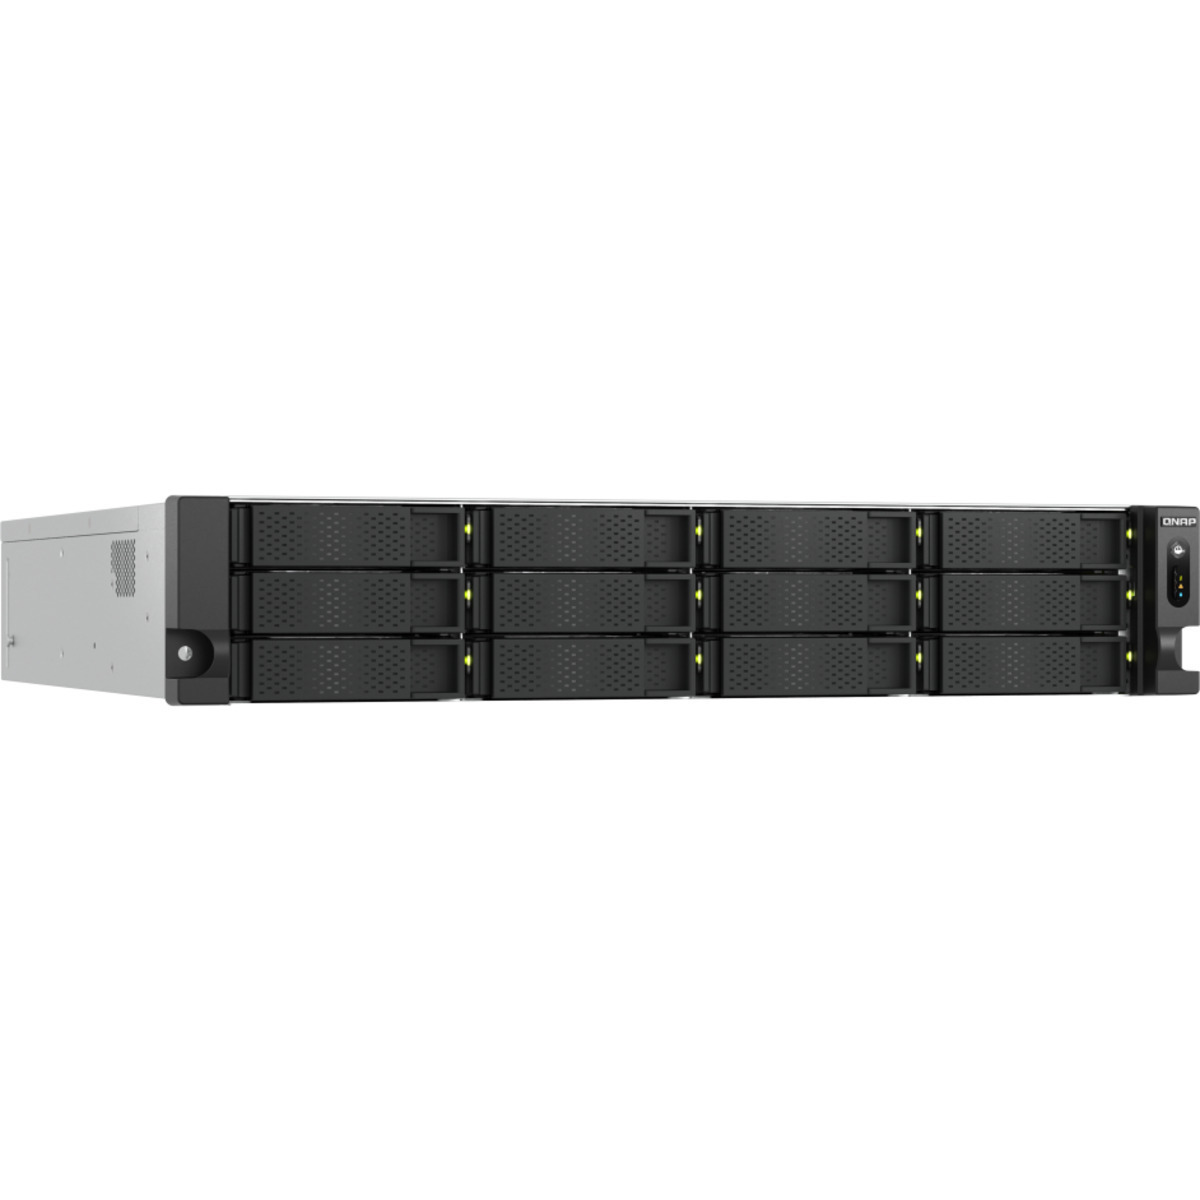 QNAP TS-h1277AXU-RP QUTS hero Ryzen 7 48tb 12-Bay RackMount Large Business / Enterprise NAS - Network Attached Storage Device 8x6tb Seagate IronWolf ST6000VN006 3.5 5400rpm SATA 6Gb/s HDD NAS Class Drives Installed - Burn-In Tested TS-h1277AXU-RP QUTS hero Ryzen 7